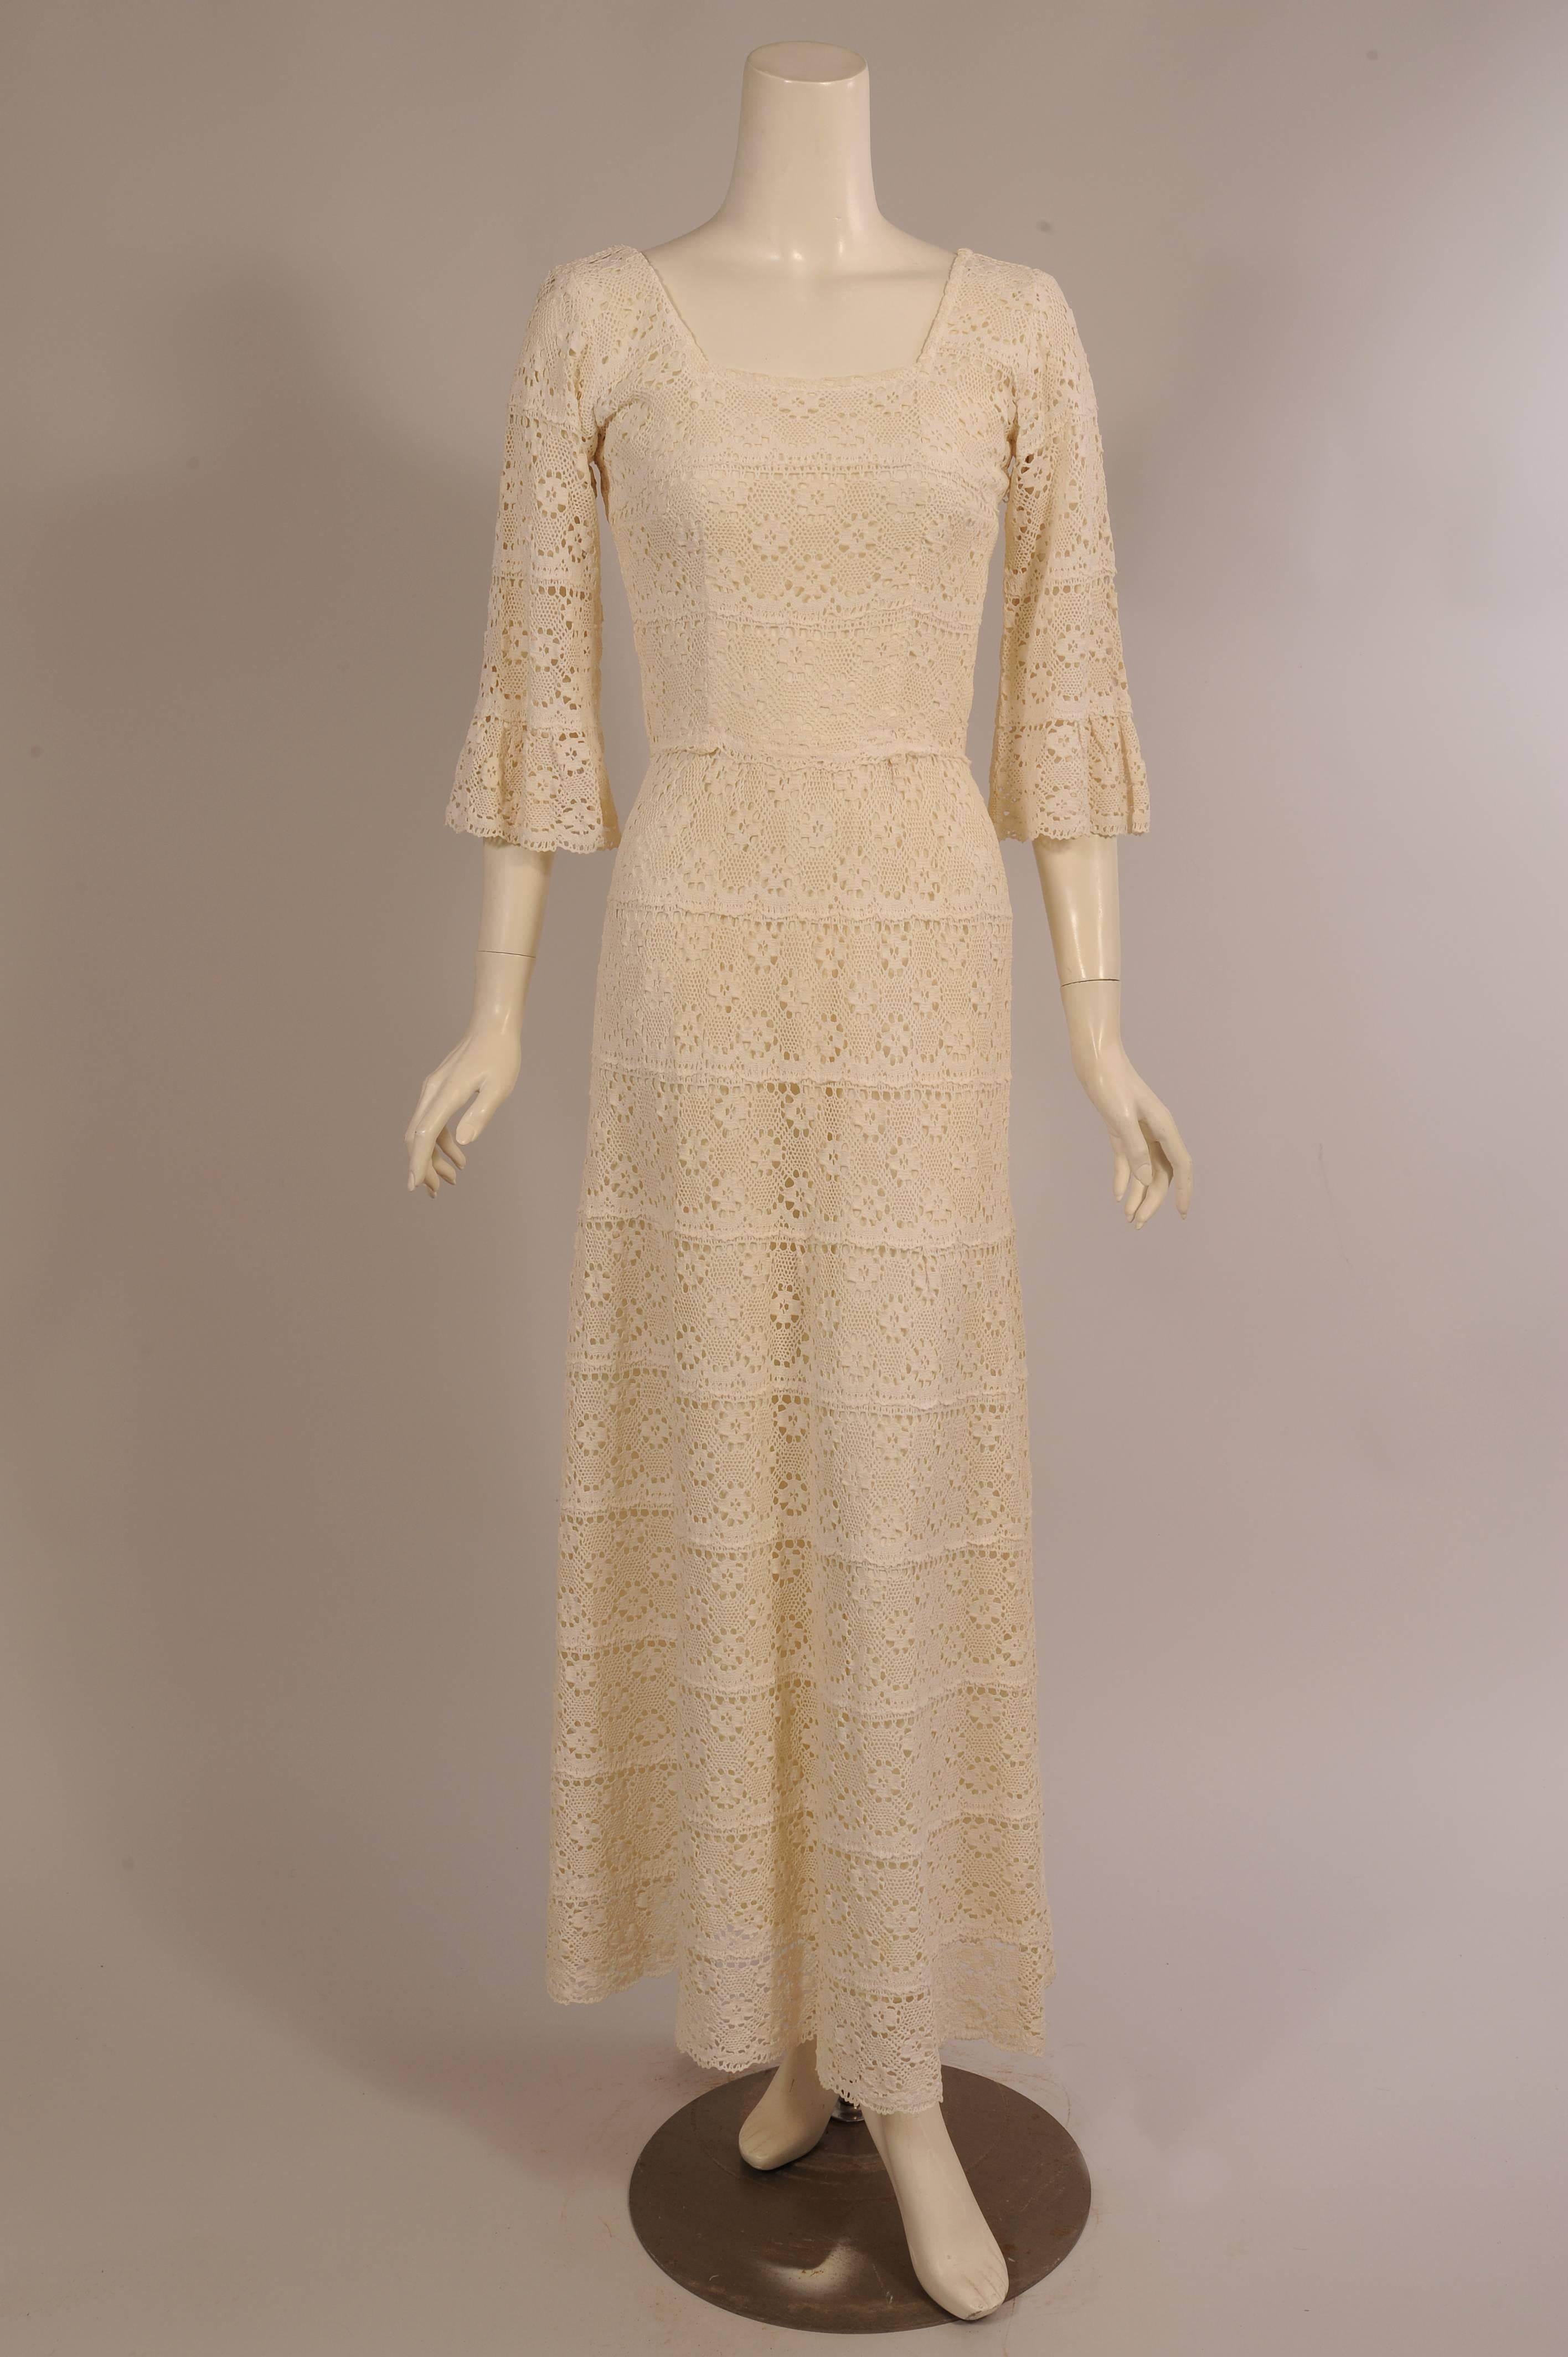 Women's 1970's Lace Maxi Dress with Braided Metallic Gold Belt For Sale